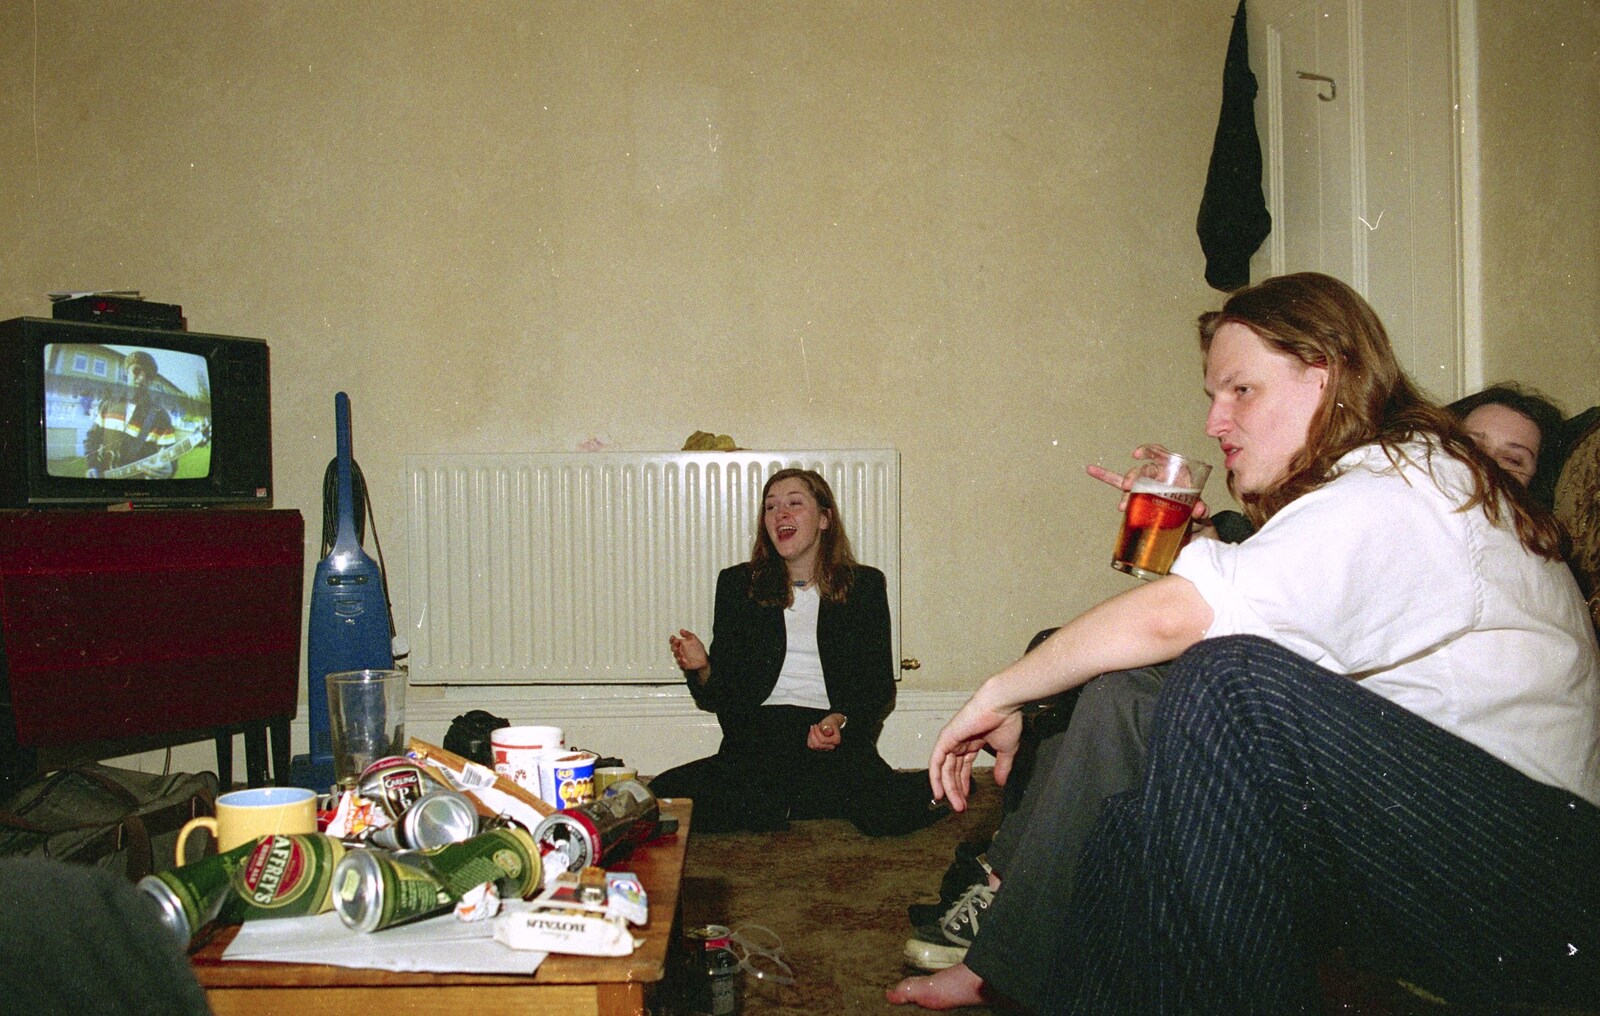 Sis Graduates from De Montfort, Leicester, Leicestershire - 9th August 1997: Time for beer (there is the odd empty can on the table)